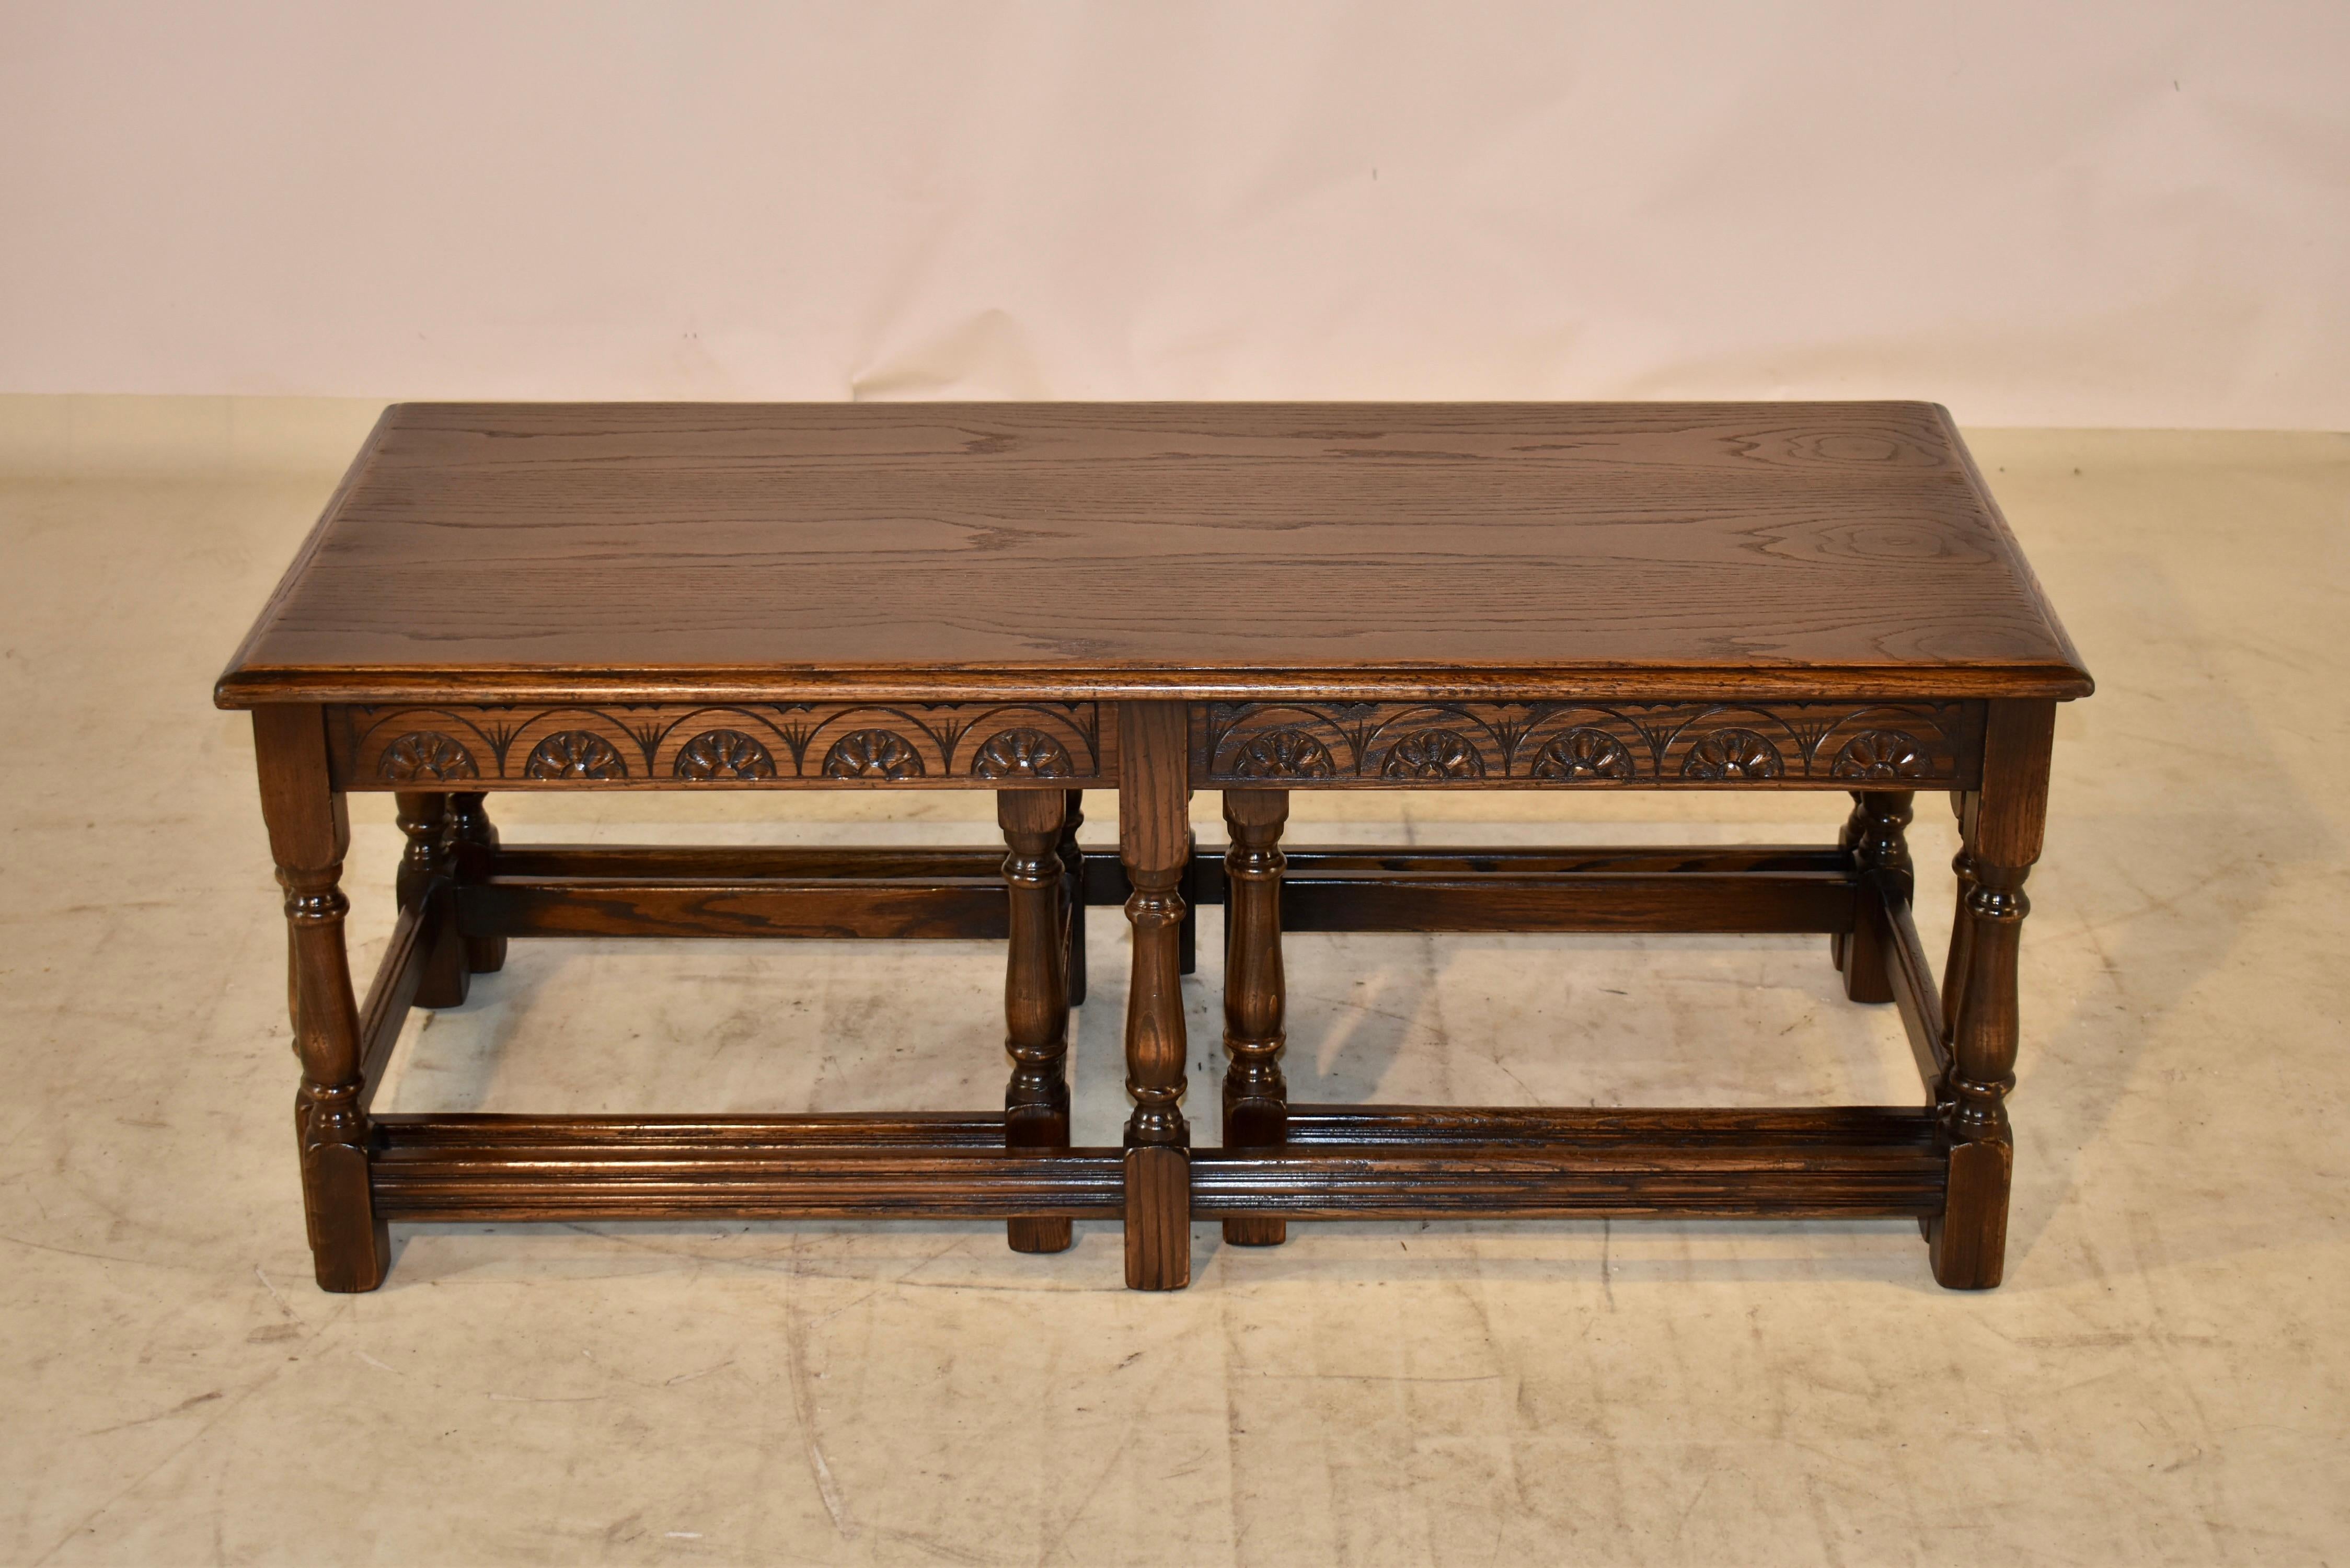 Set of three English nesting coffee tables made from oak. the top is beveled on all three of the tables, following down to a hand carved decorated apron on the largest table, and simple aprons on the smaller tables. The tables are supported on